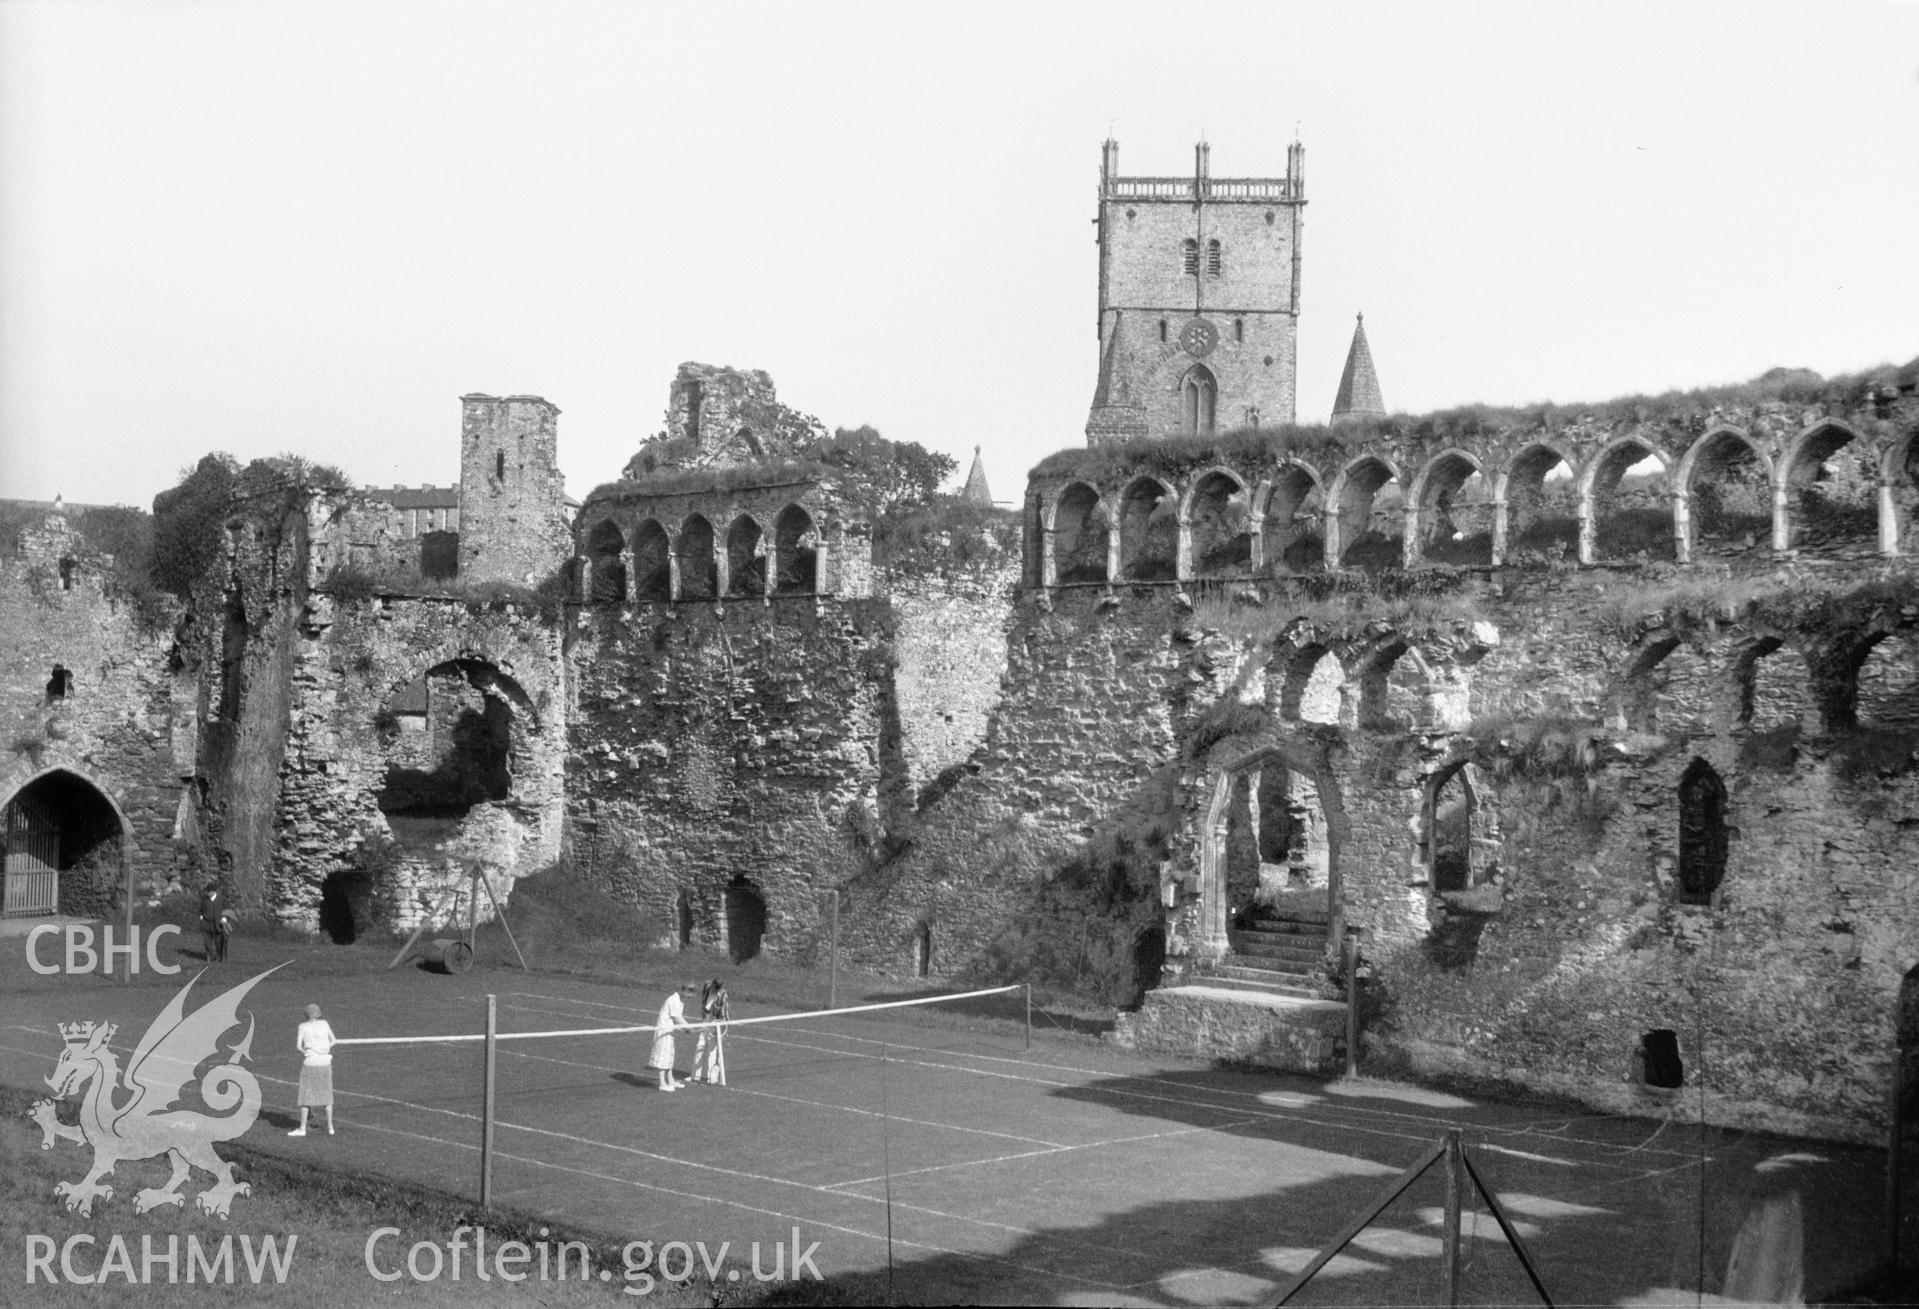 A black and white print of the Bishops Palace, St Davids, showing tennis game in the foreground. Taken by Miss Wight, c.1934